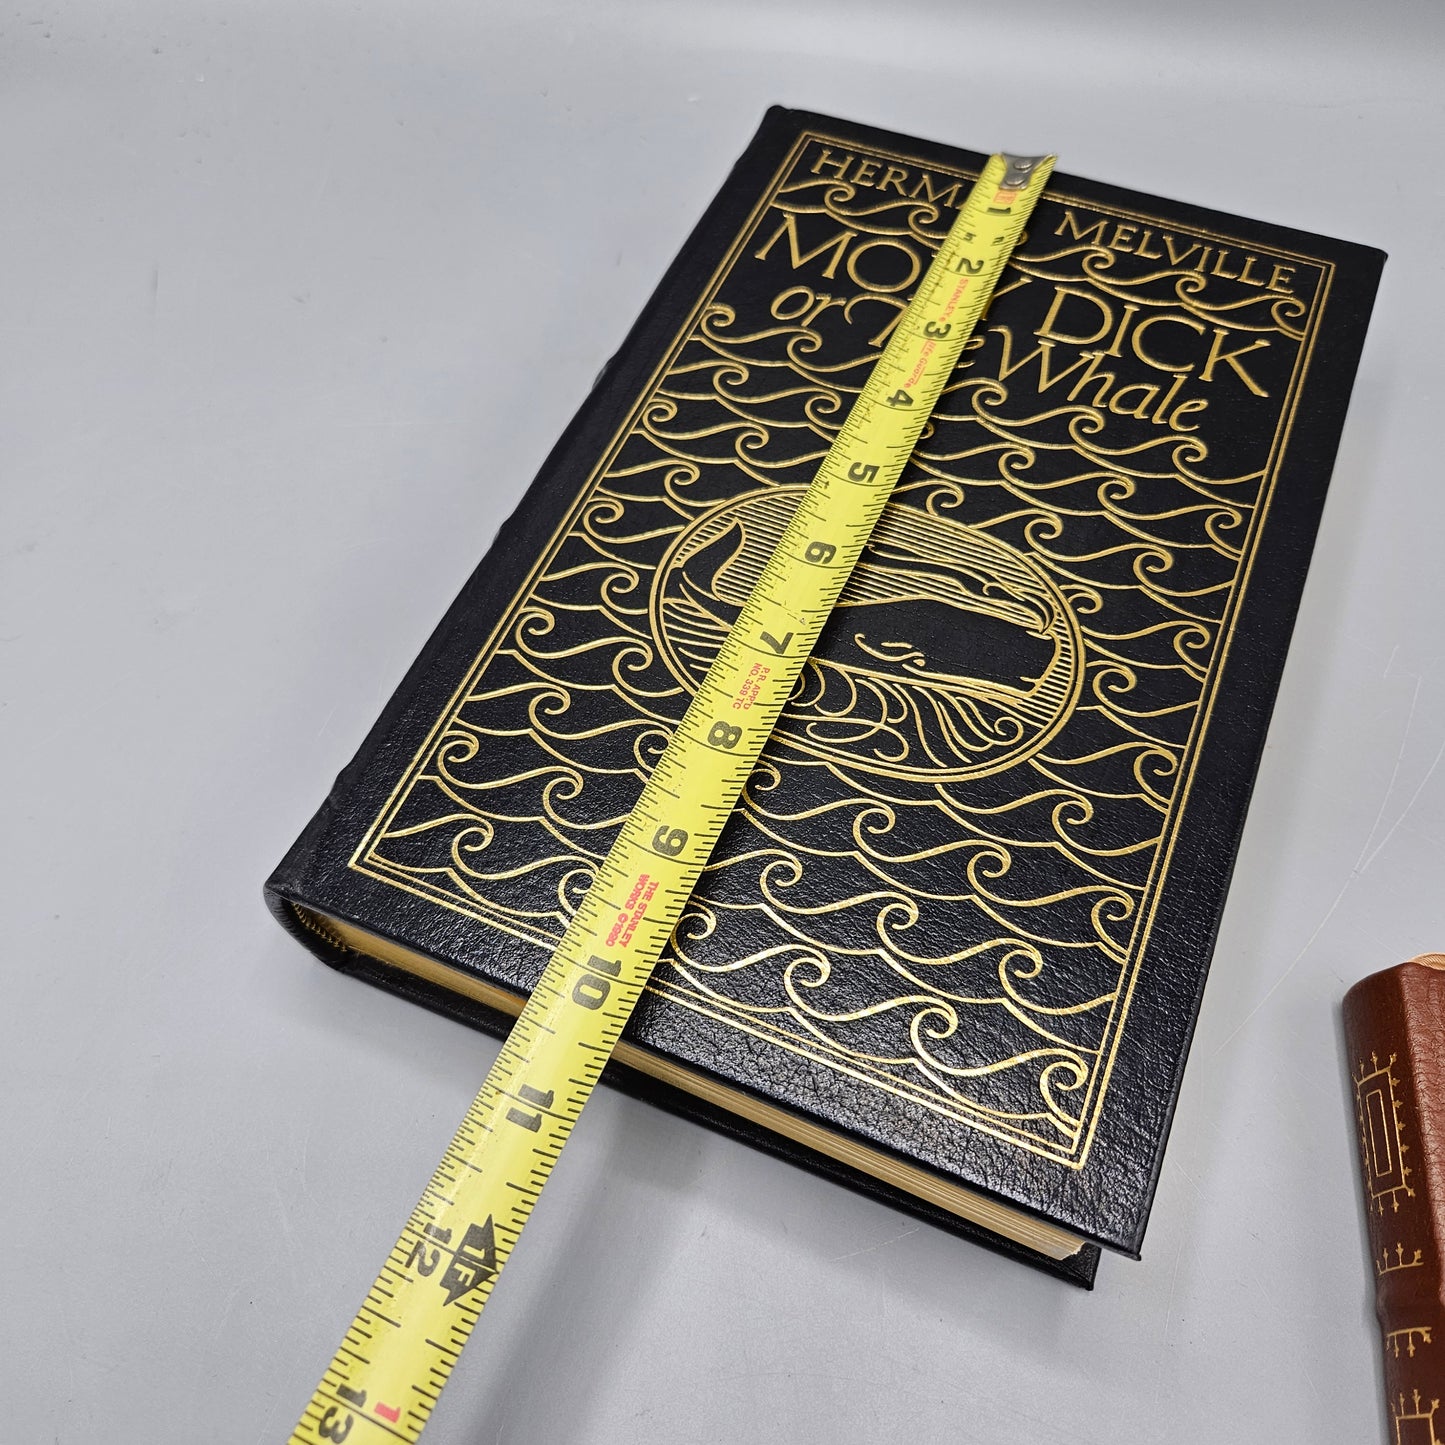 Easton Press Leather Bound Book, Moby Dick by Herman Melville